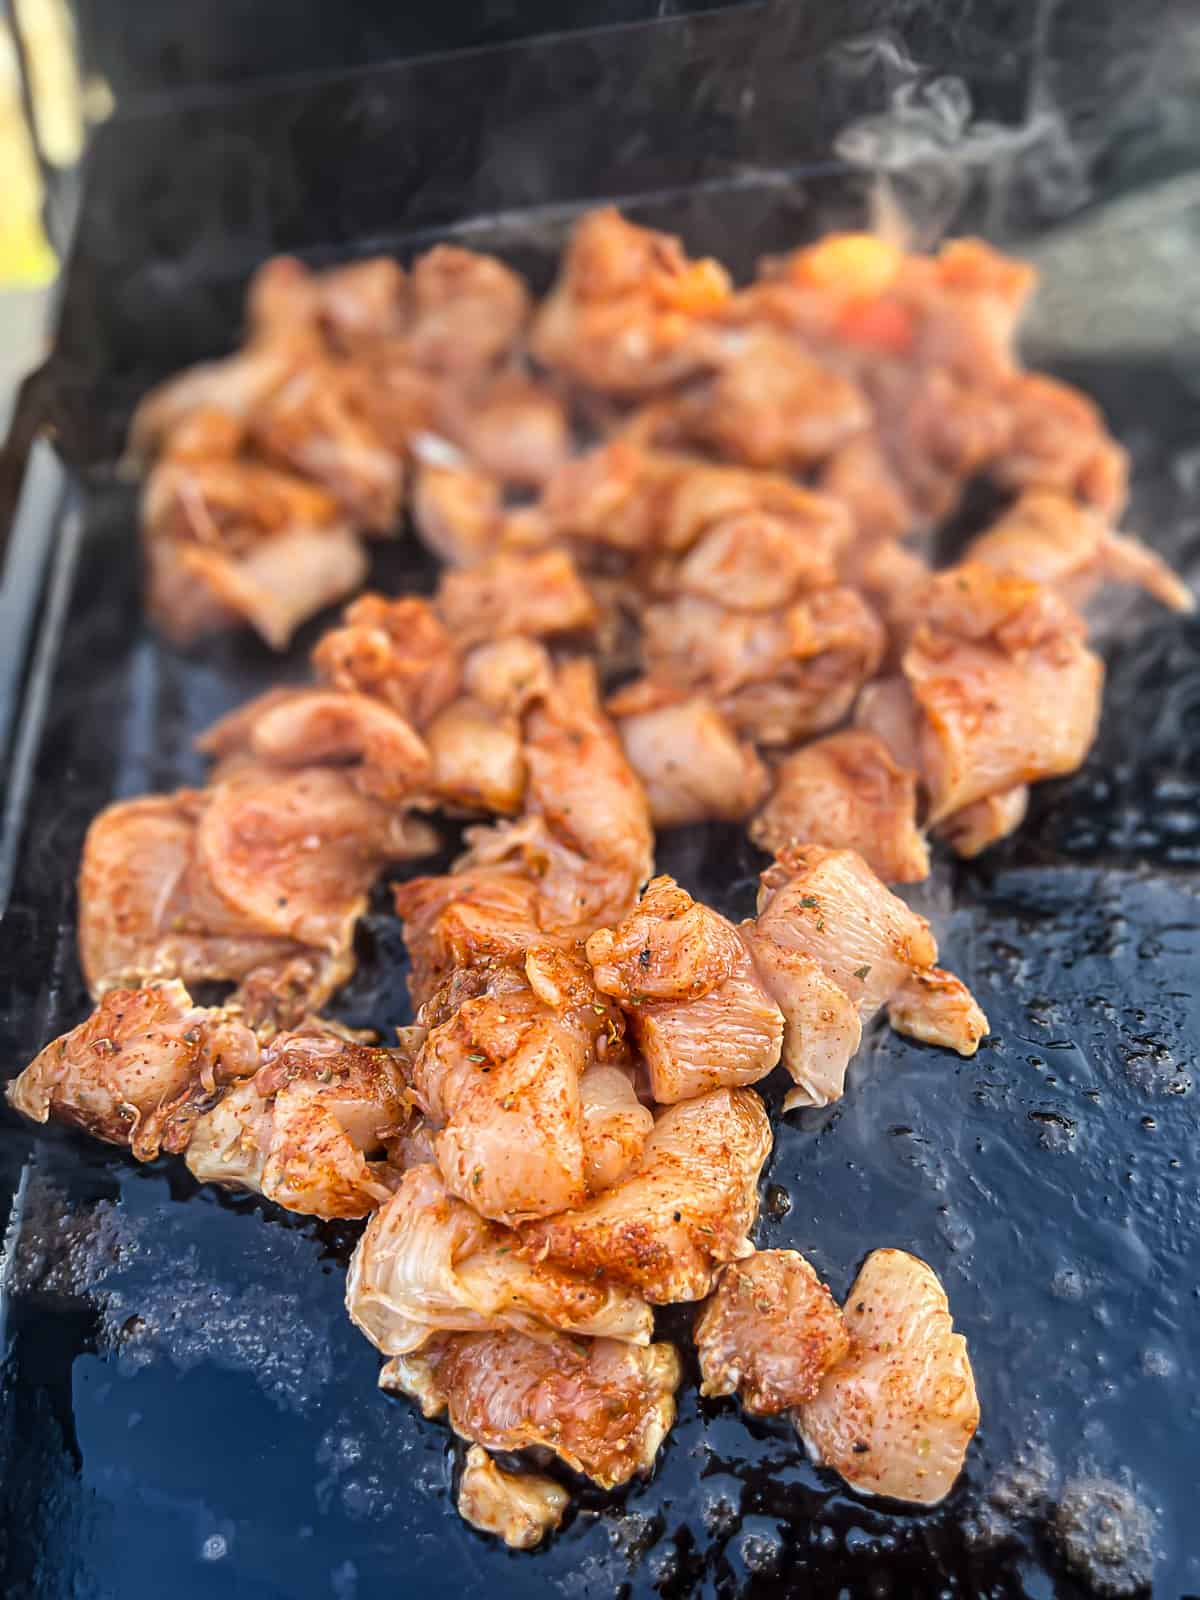 Cooking chicken with spices on a Traeger griddle